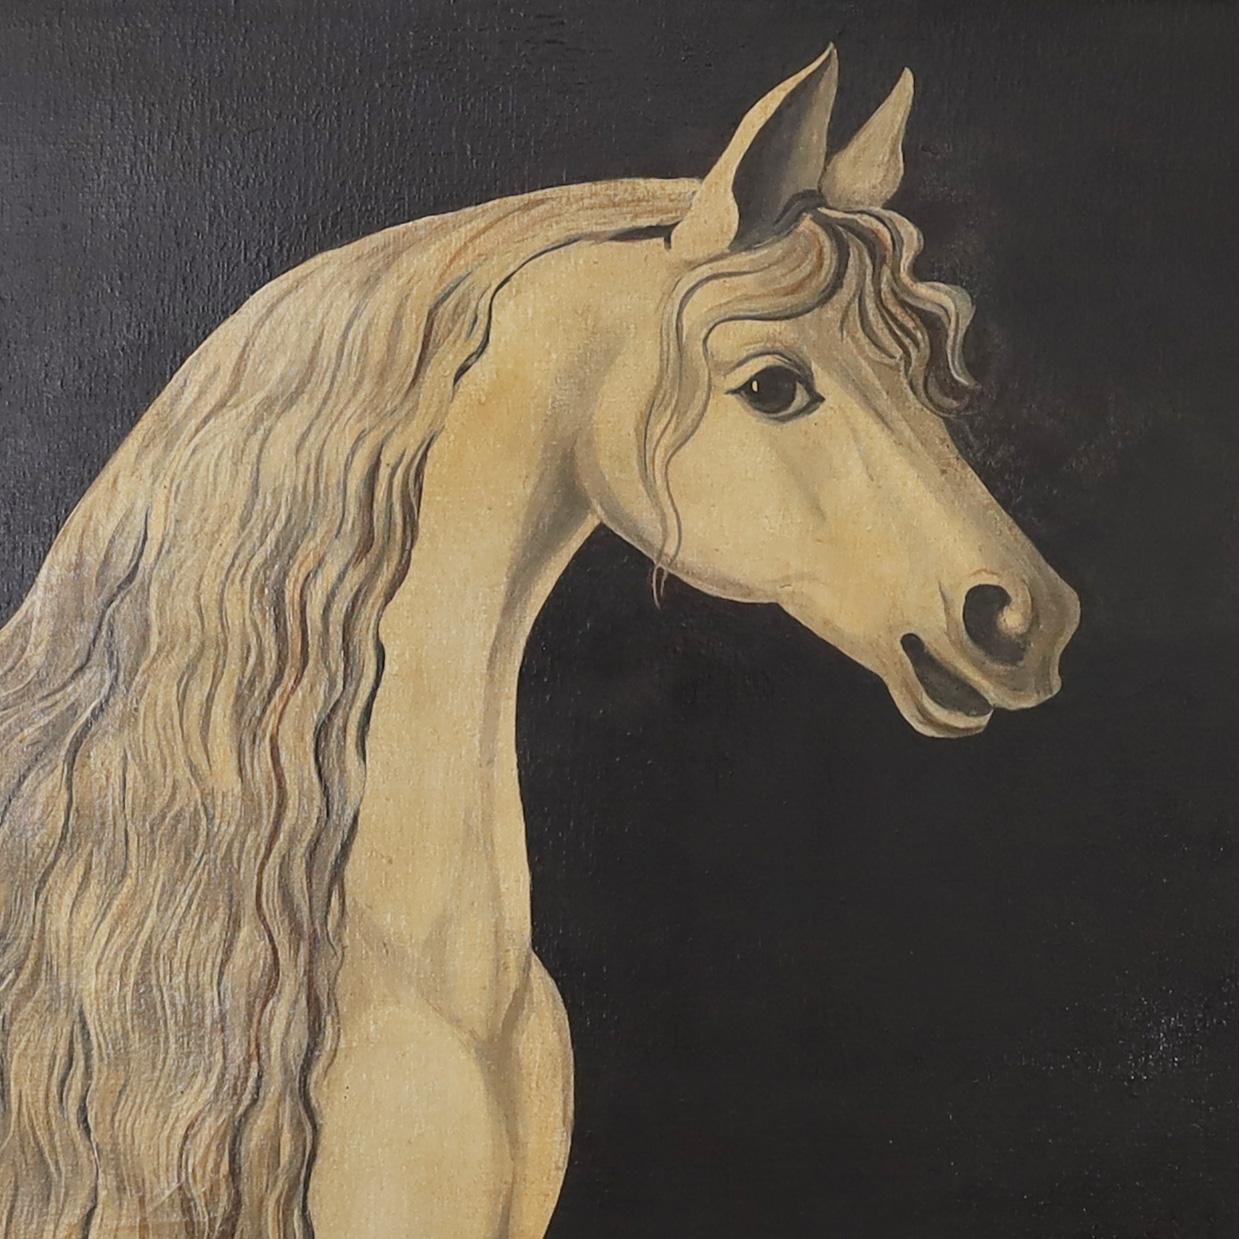 Folk Art William Skilling Painting on Canvas of a Horse